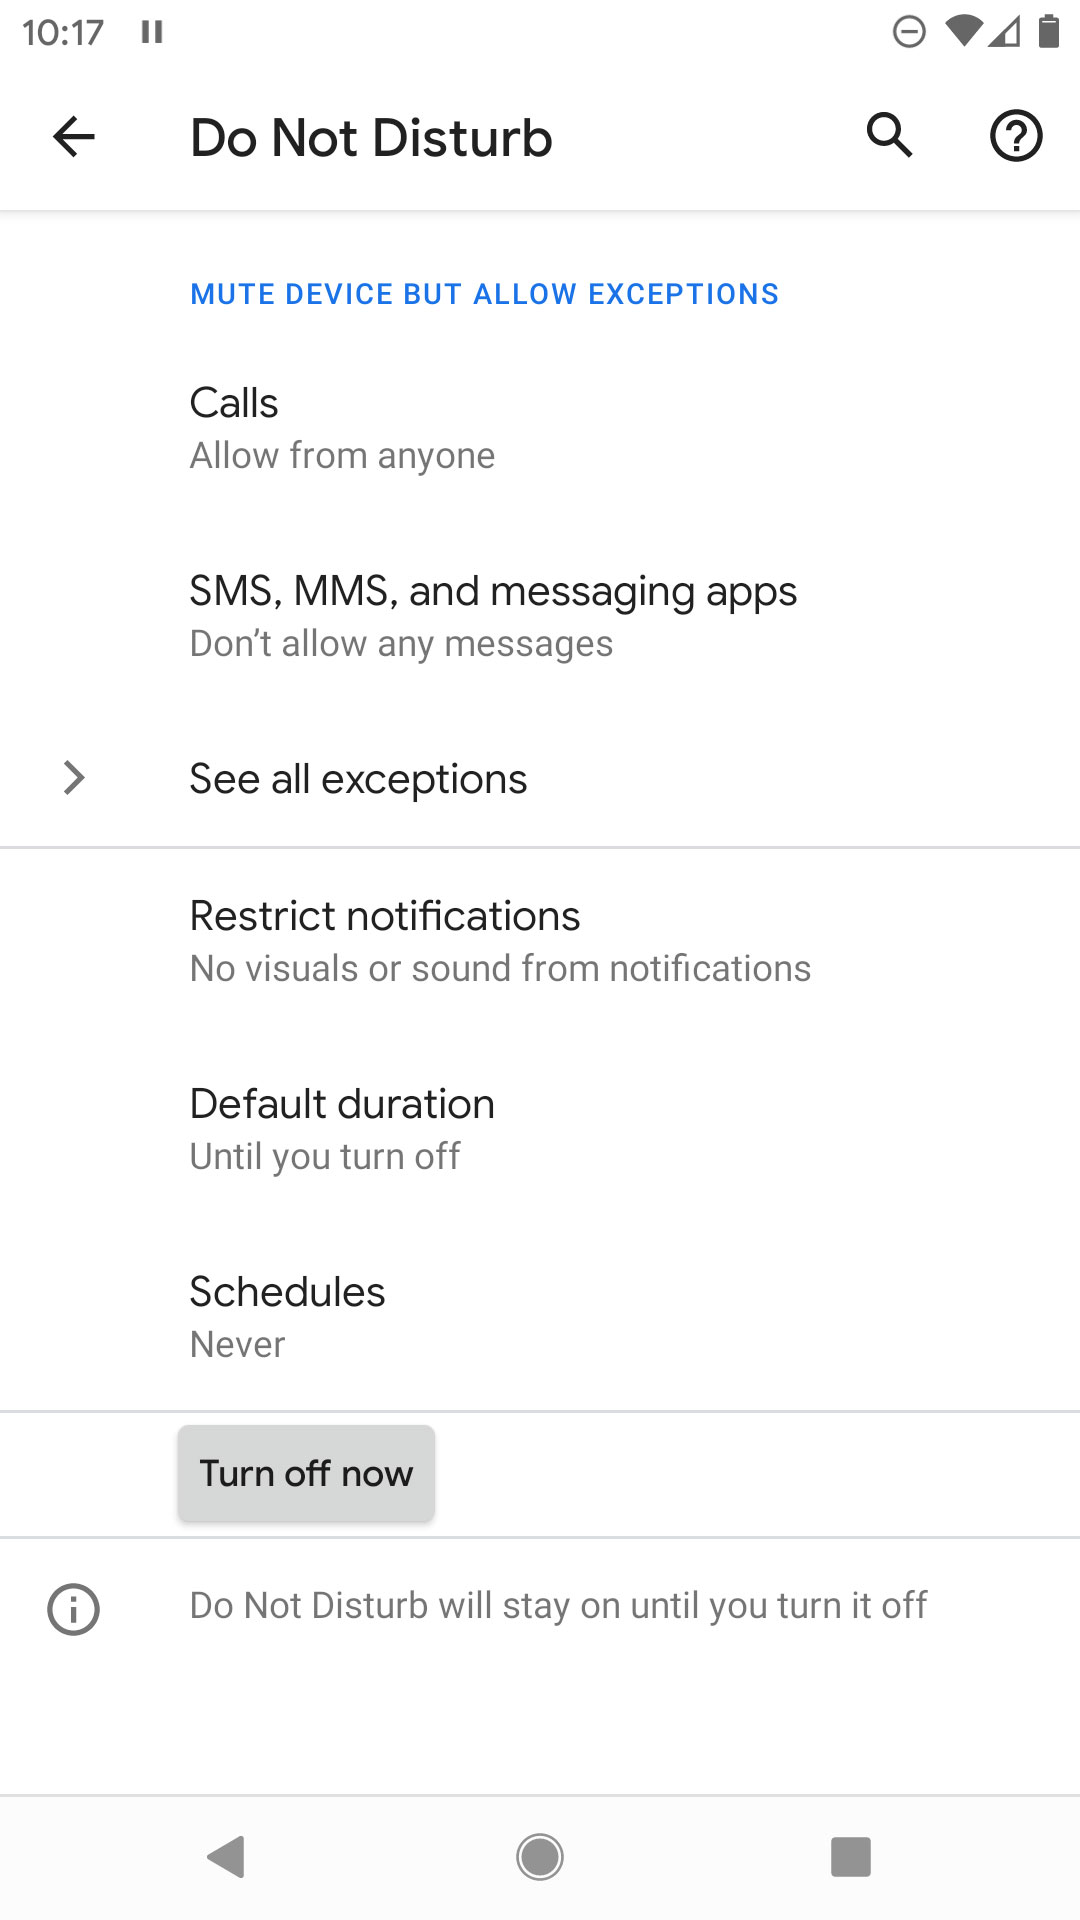 Do Not Disturb settings in Android